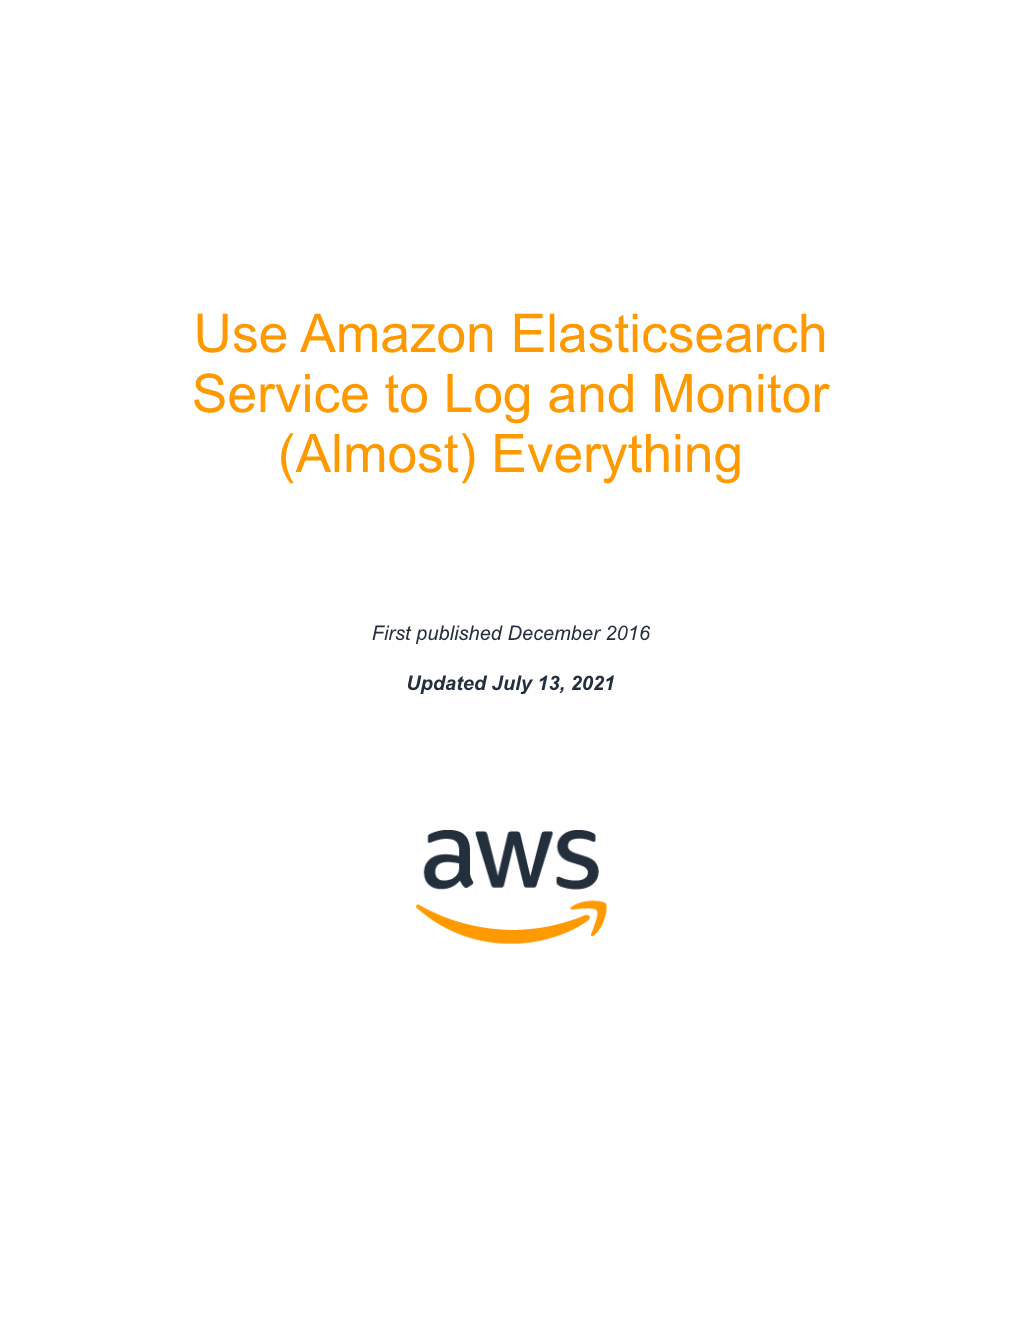 Use Amazon Elasticsearch to Log and Monitor Almost Everything